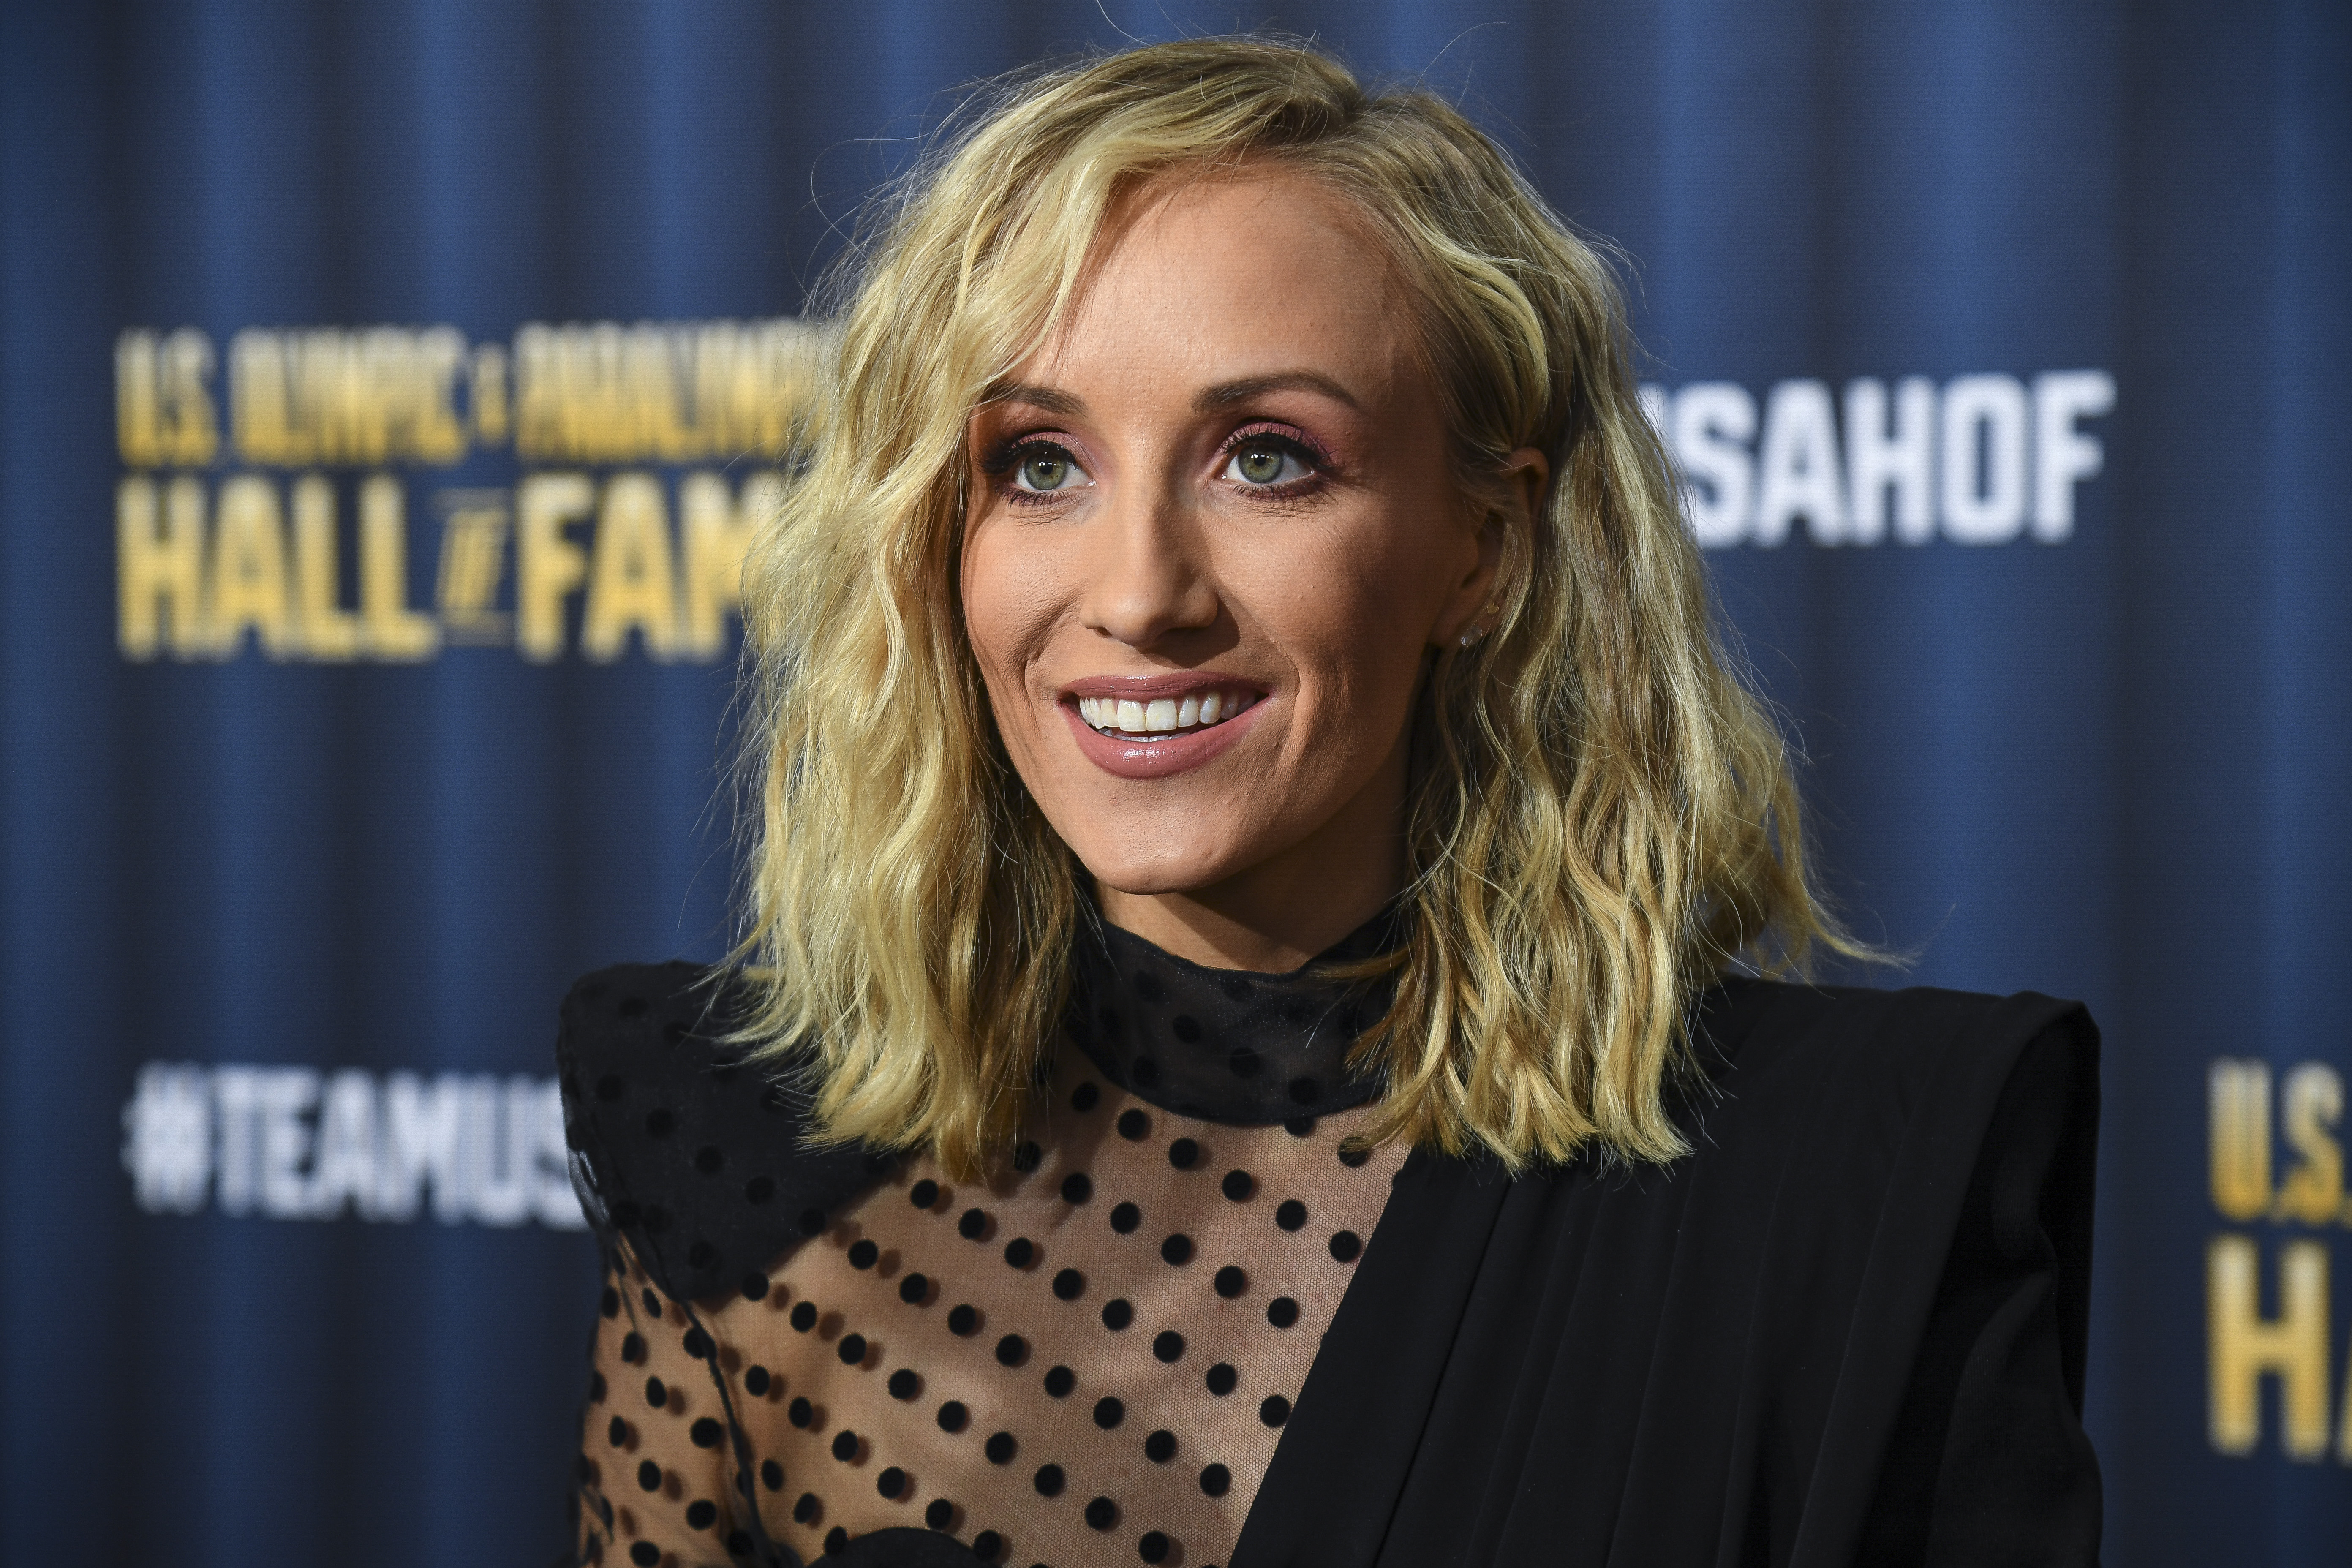 Nastia Liukin talks to the media on the red carpet before the U.S. Olympic Hall of Fame Class of 2019 Induction Ceremony on November 1, 2019, in Colorado Springs, Colorado. | Source: Getty Images